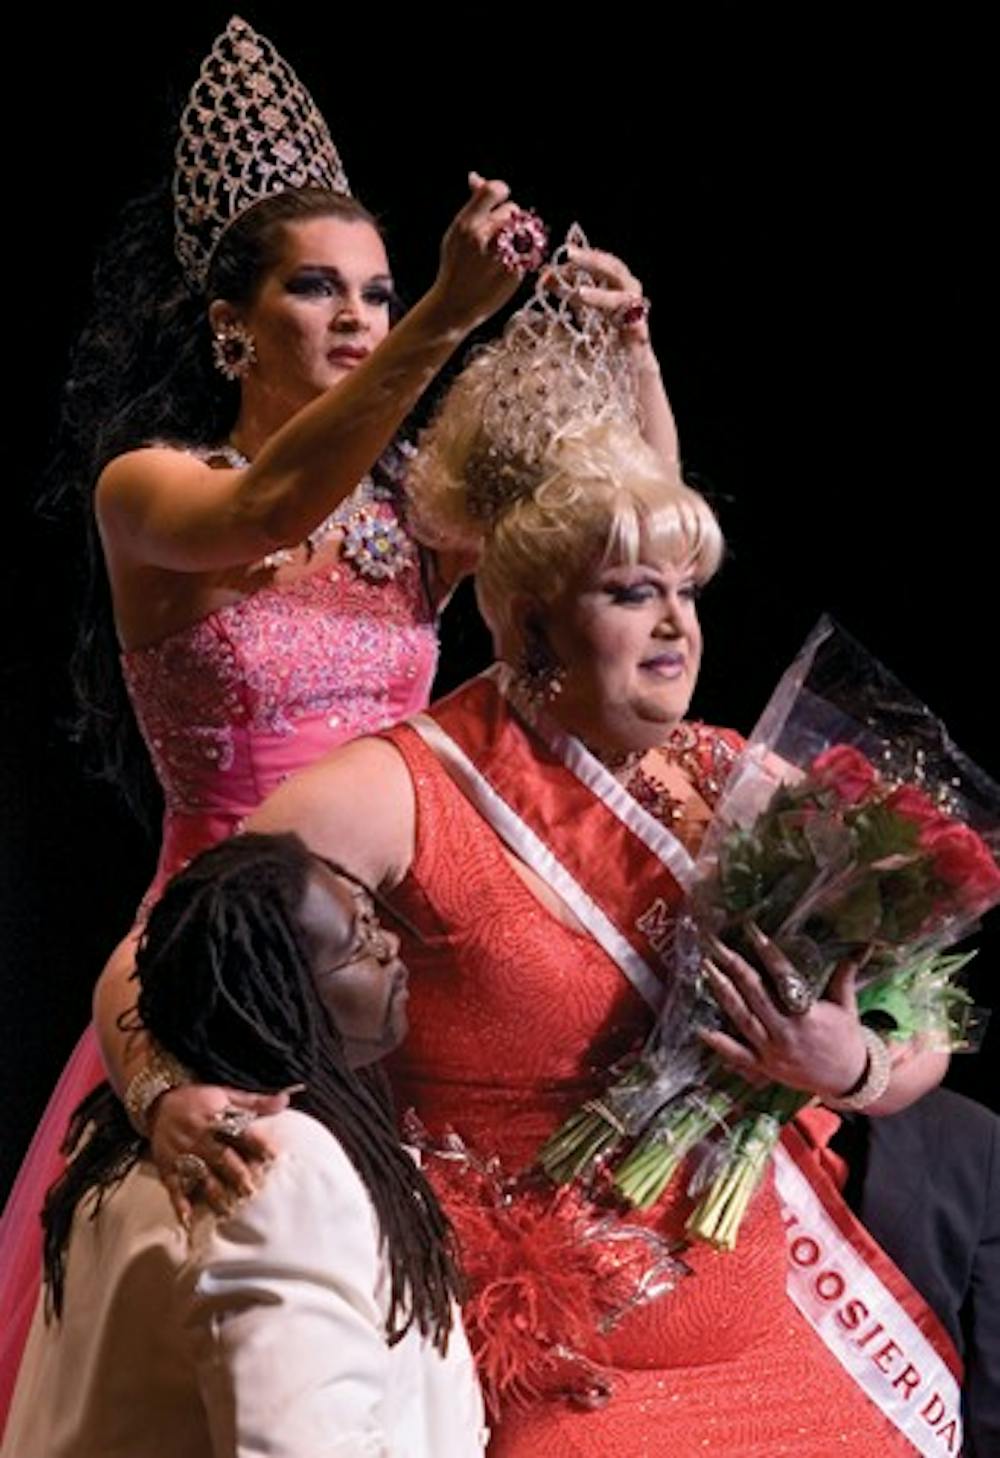 IDS FILE PHOTO
Former Miss Gay IU Vanessa Vale passes the crown to 2007 winner India Black. Black performed a medley of Tina Turner songs for her talent section. Mr. Gay USA Xavier Brooks offered a knee to Black during the coronation.